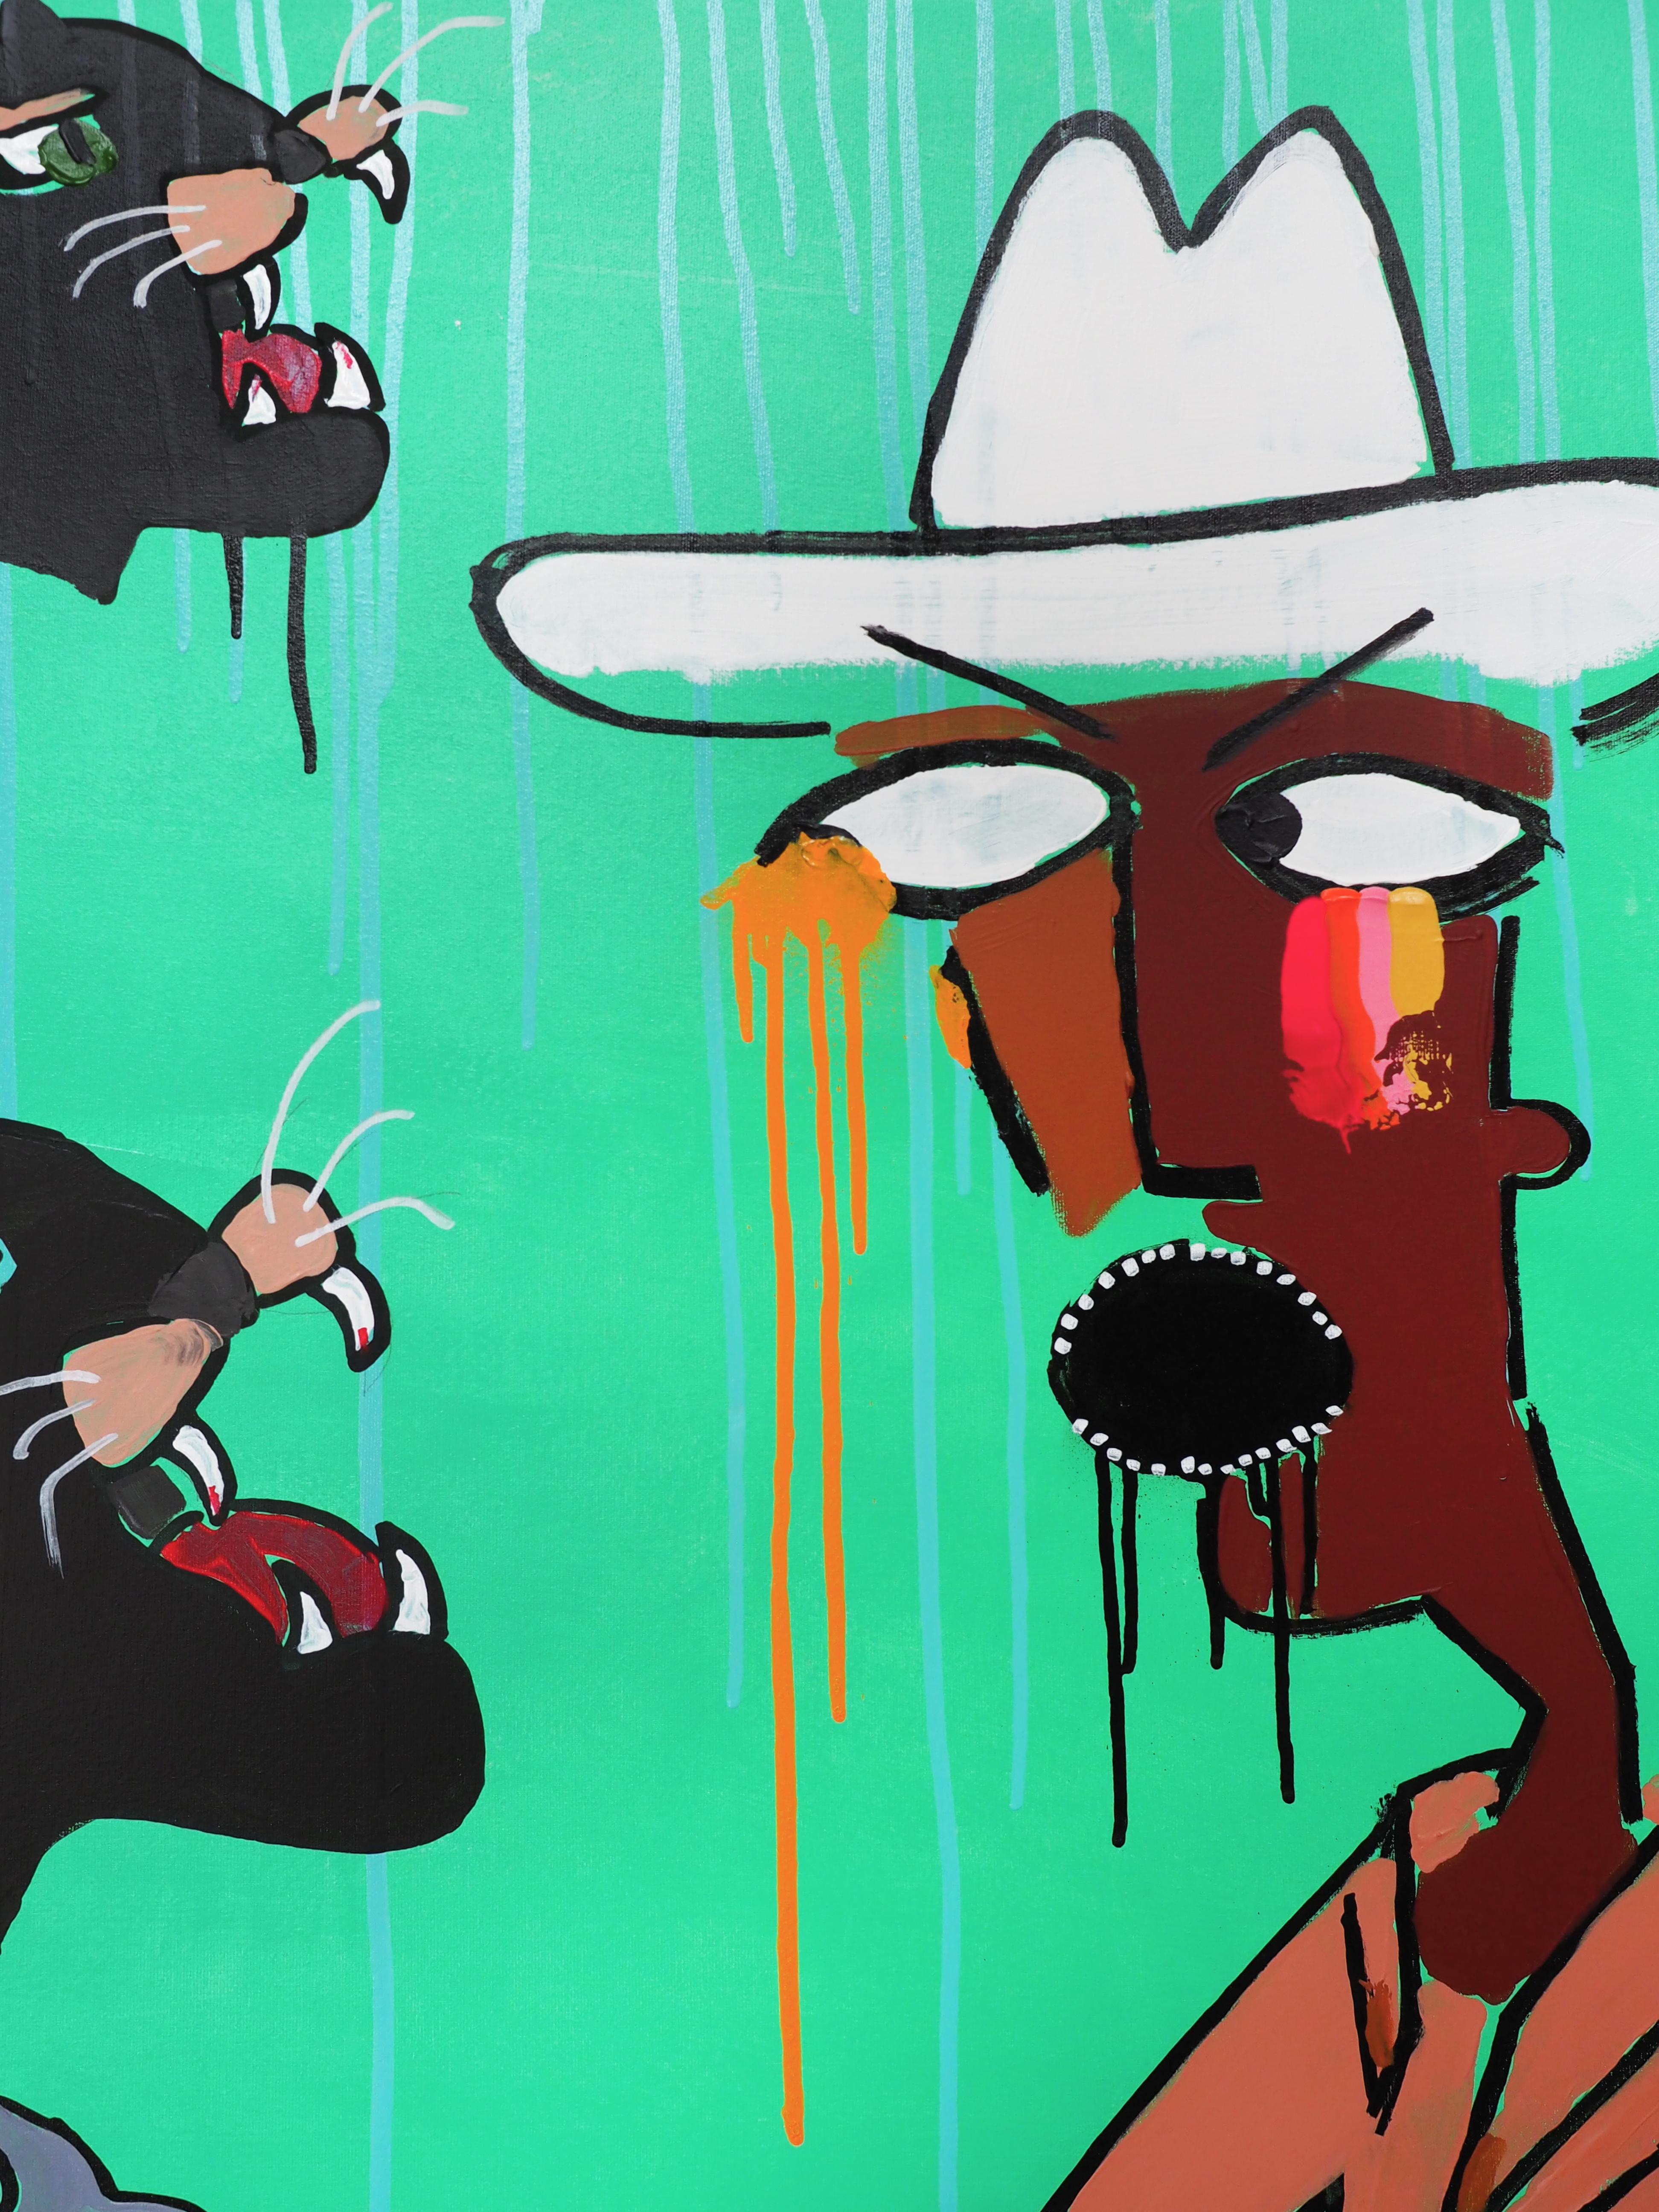 Three Panthers displays a minimalistic character of a cowboy confronting three black panthers, suggesting a theme of facing fear. Brandon Jones portrays the figure with three arms and a gun in each hand. The bright, energetic colors suggests the